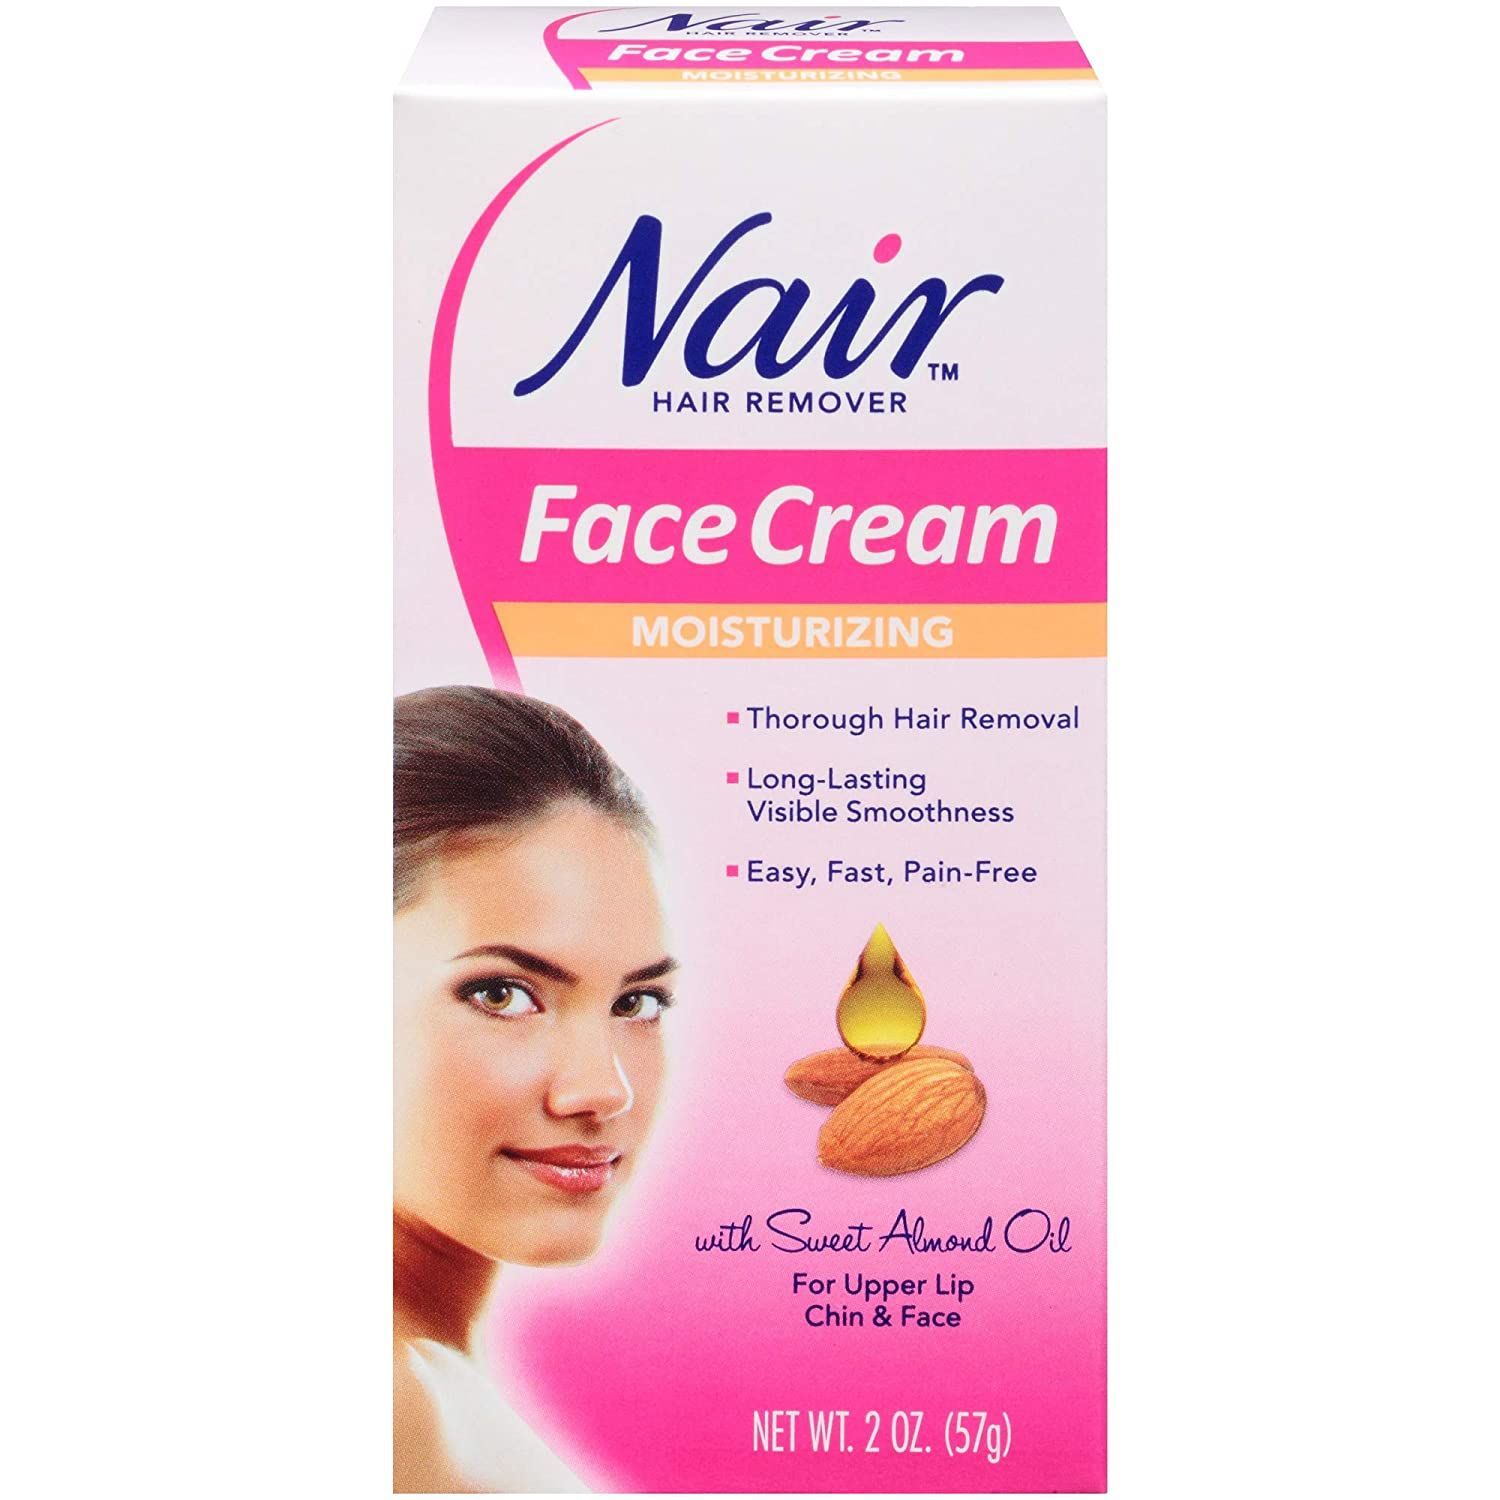 The 9 Best Hair Removal Creams to Shop in 2023: Nair, Veet, More